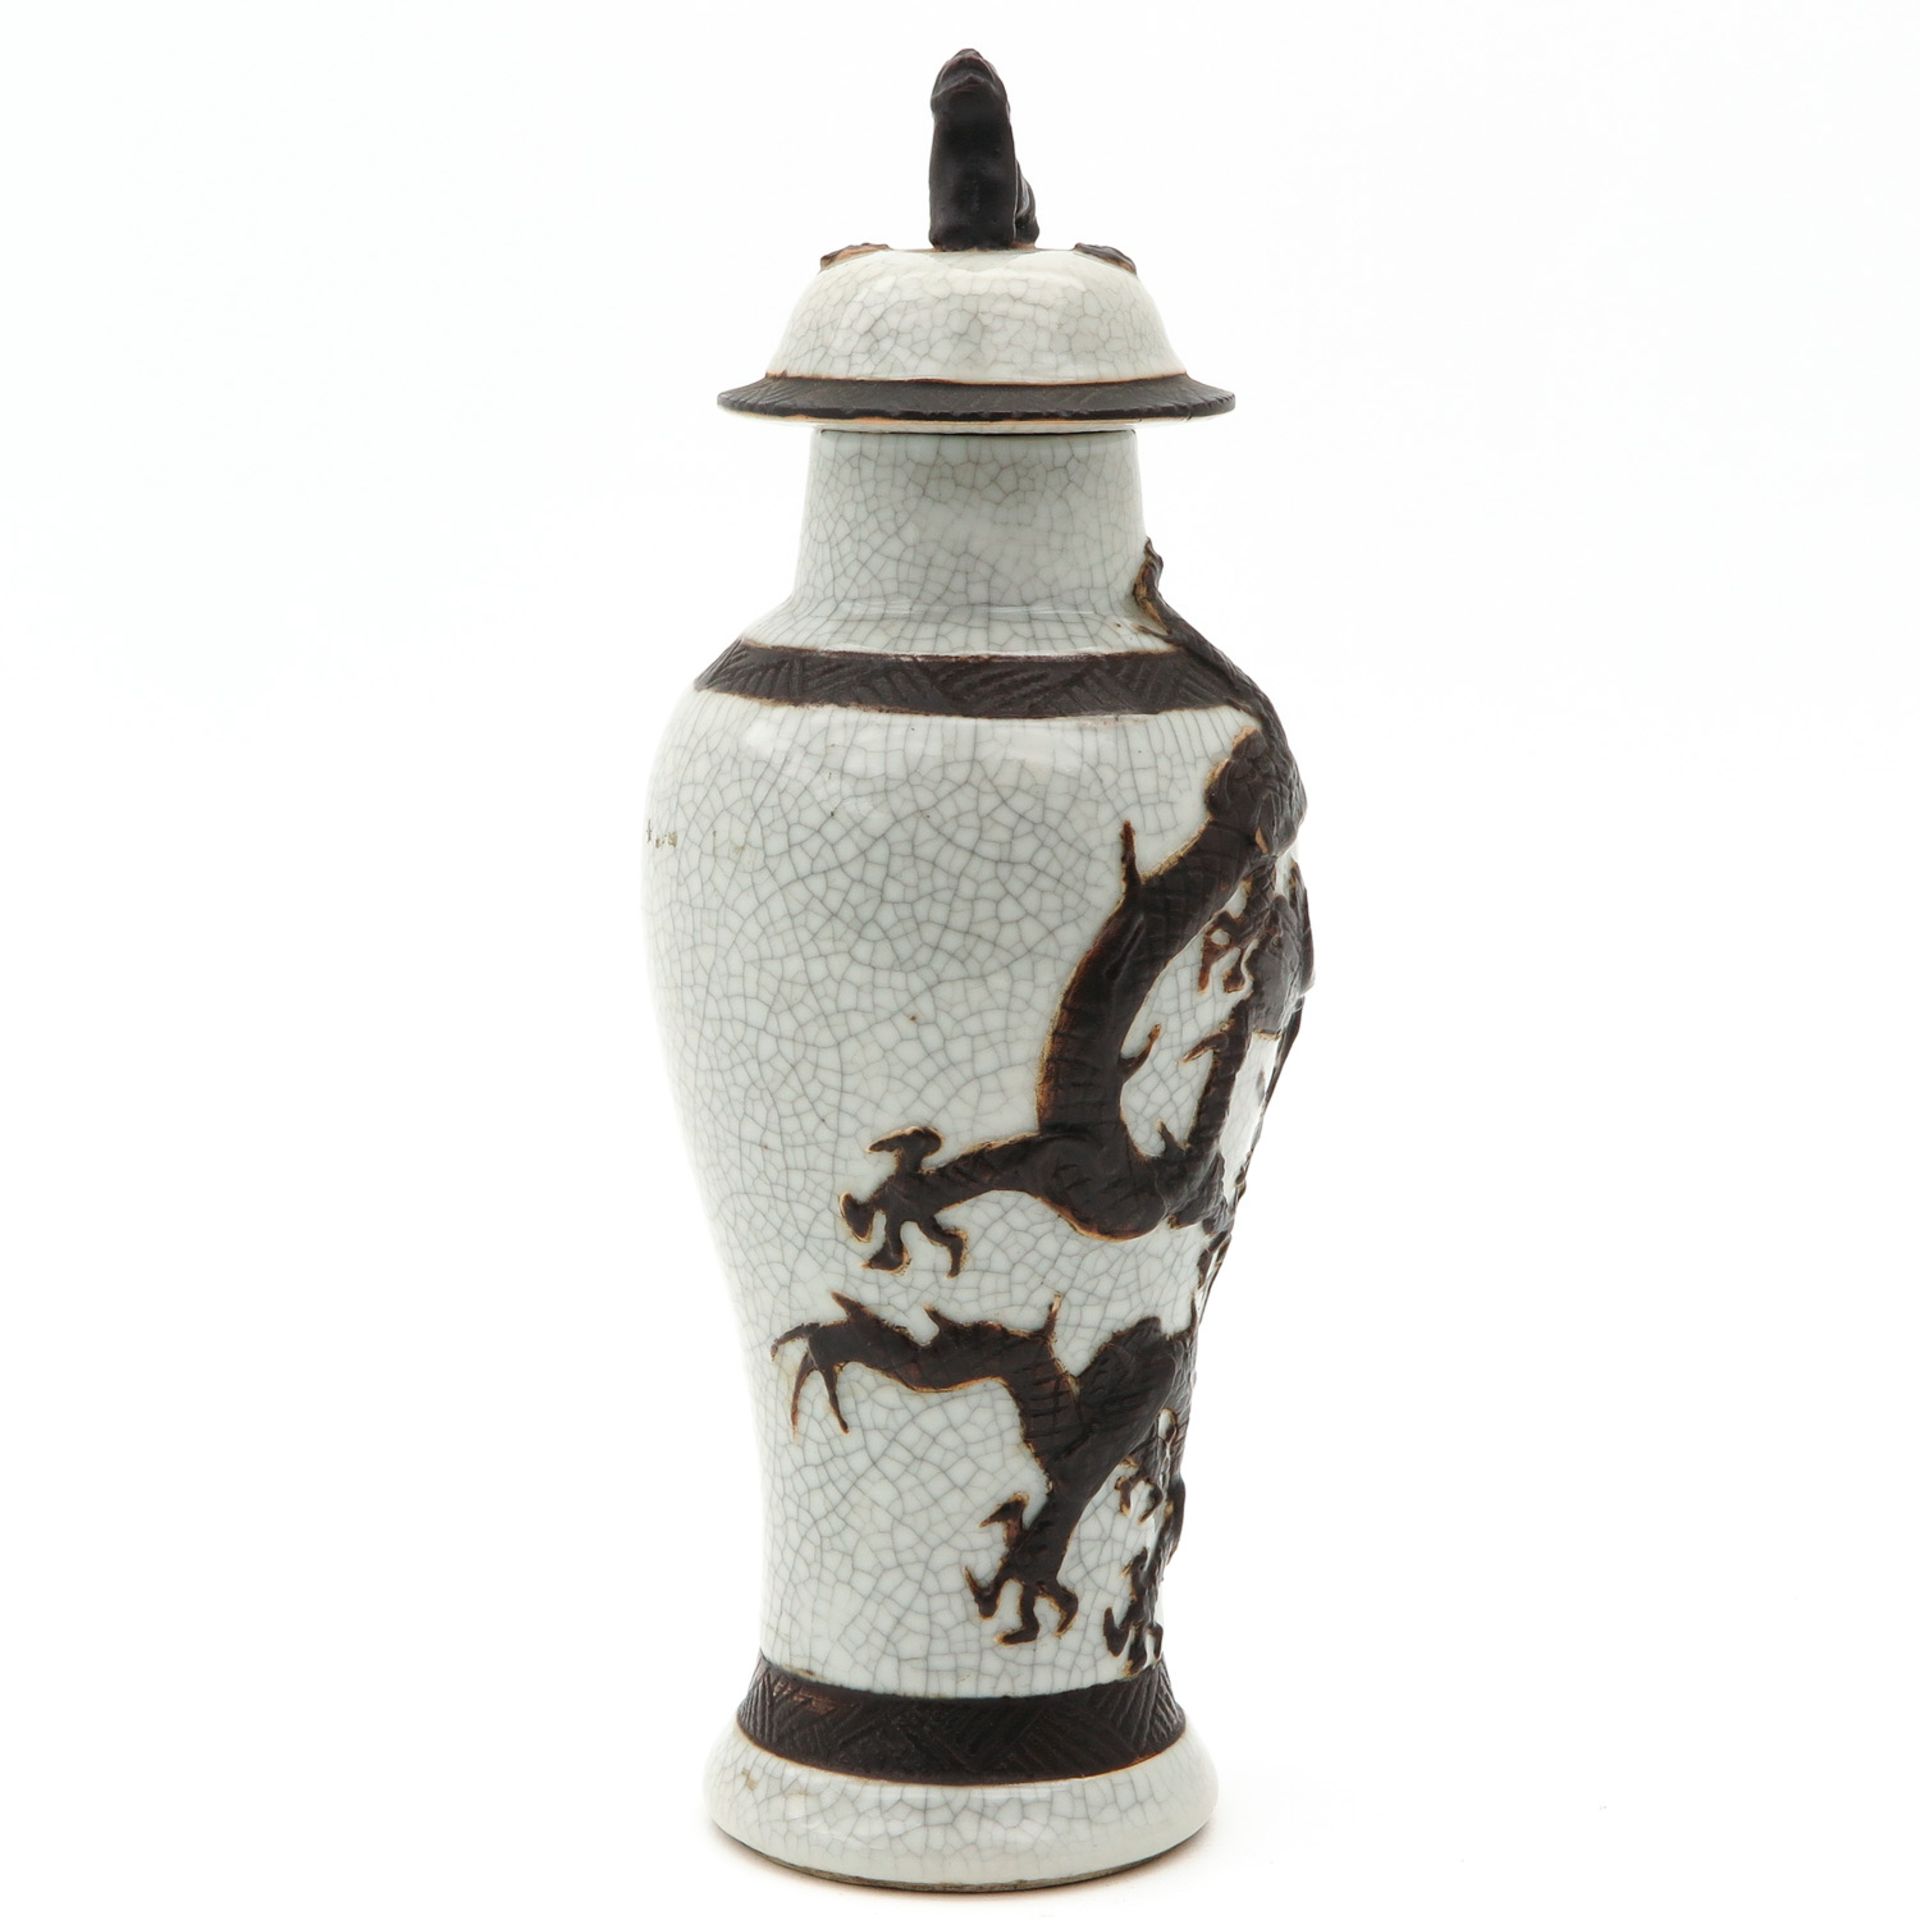 A Small Nanking Vase with Cover - Image 4 of 10